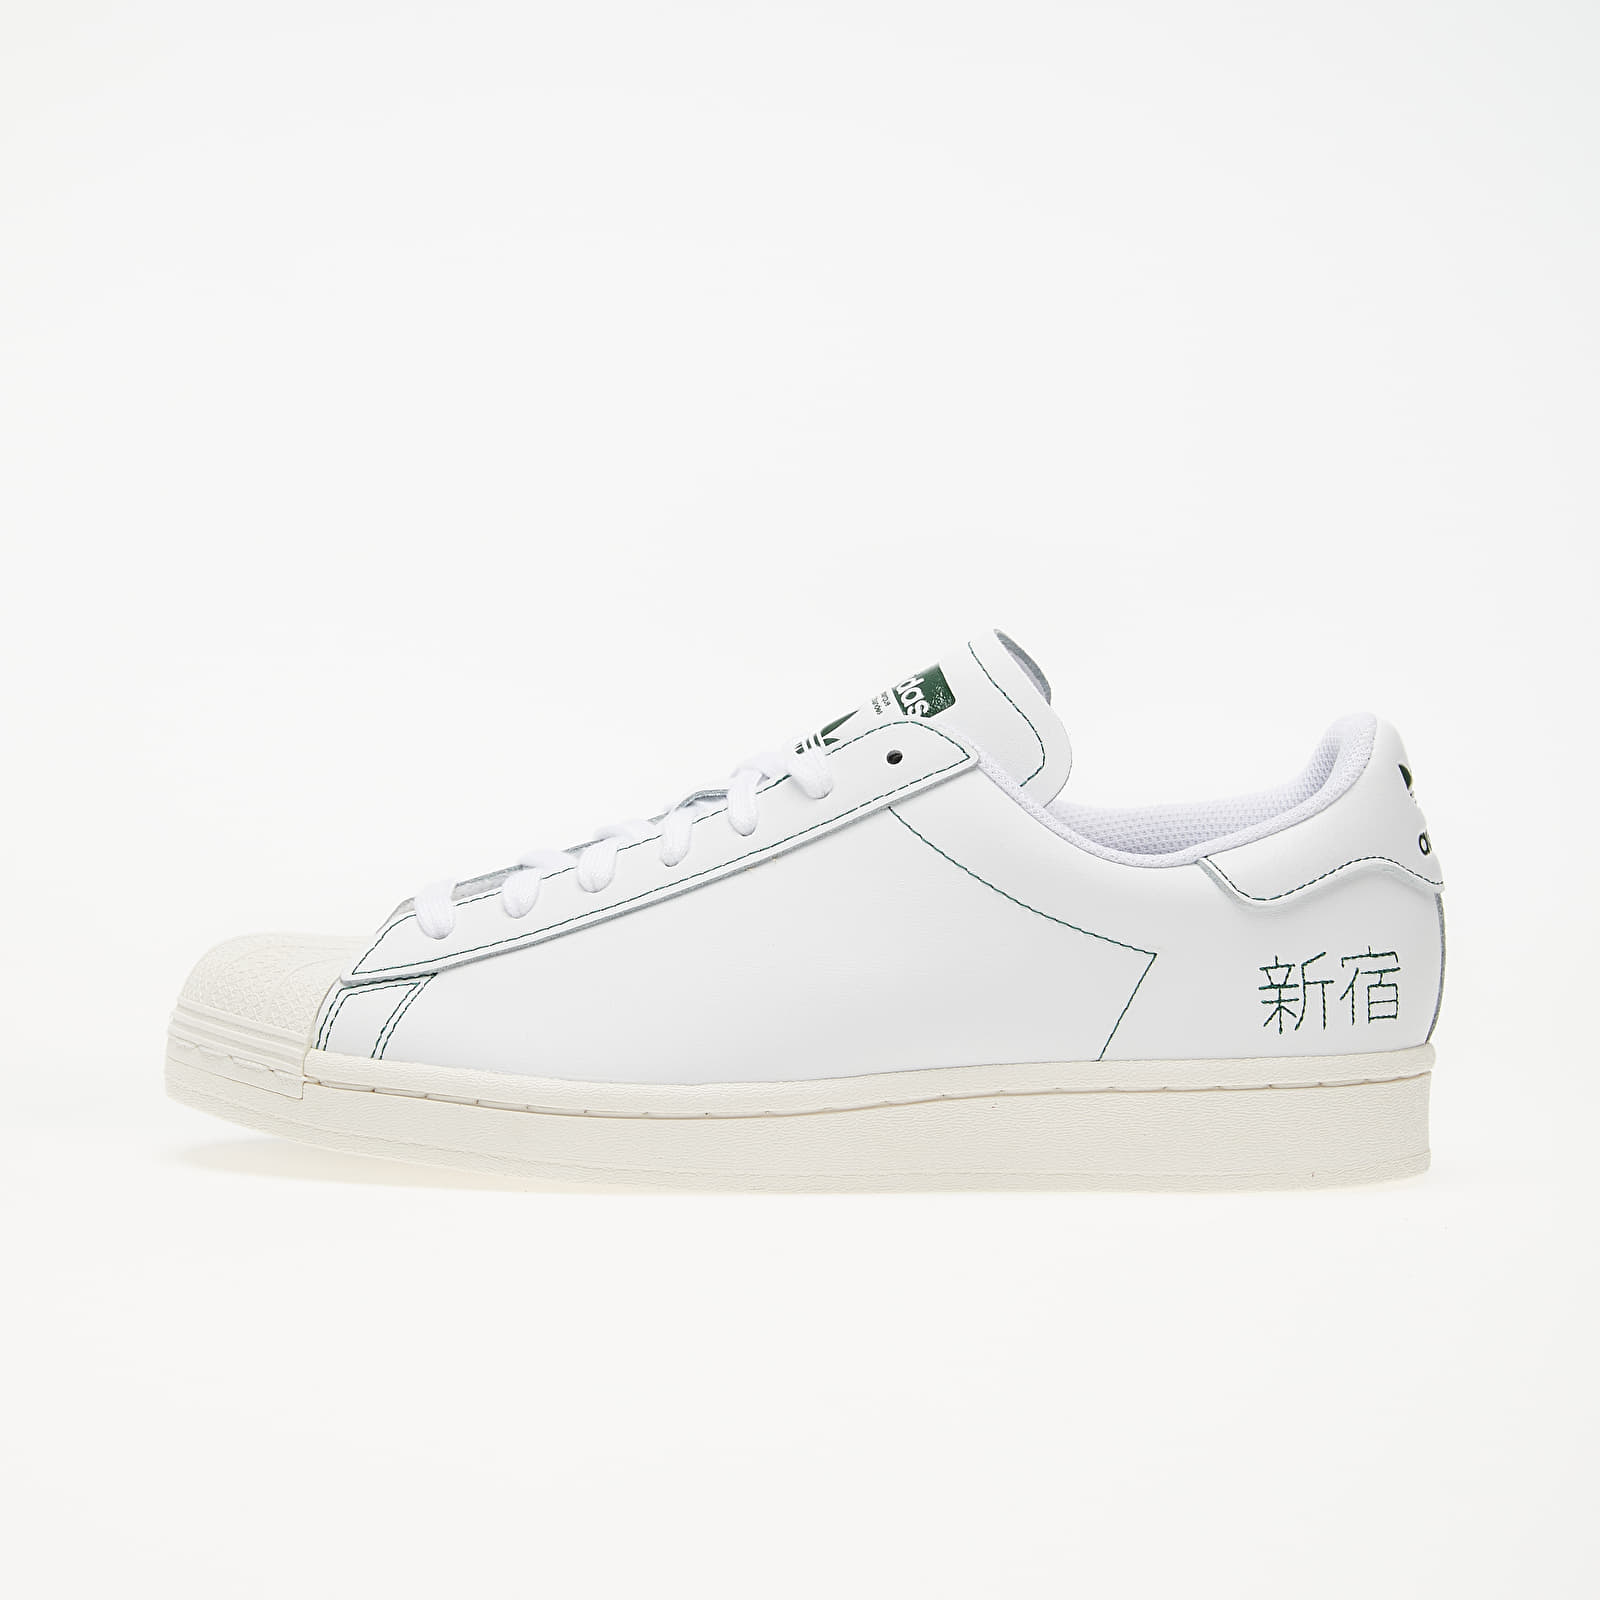 adidas Superstar Pure Ftw White/ Ftw White/ Core White 58639